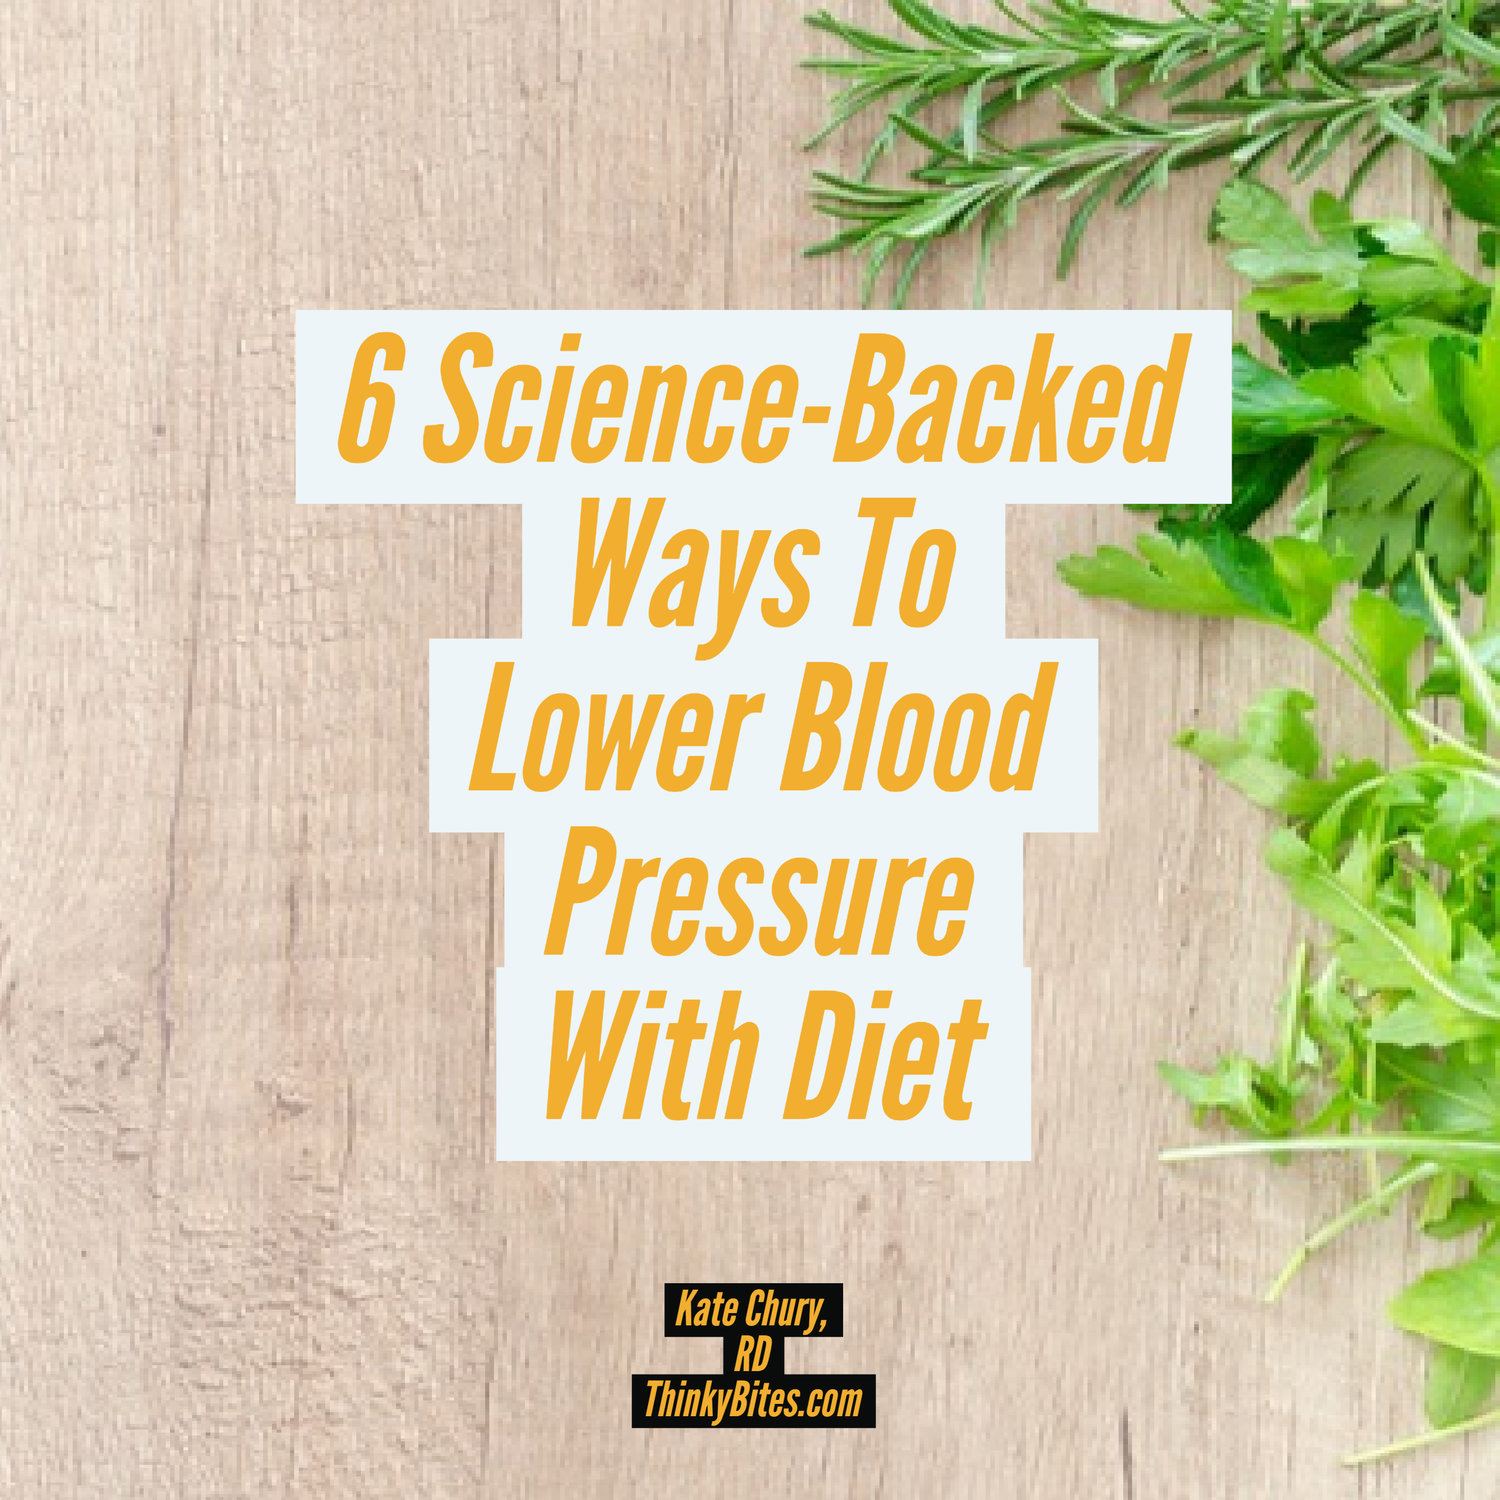 6 Science-Backed Ways To Lower Blood Pressure With Diet